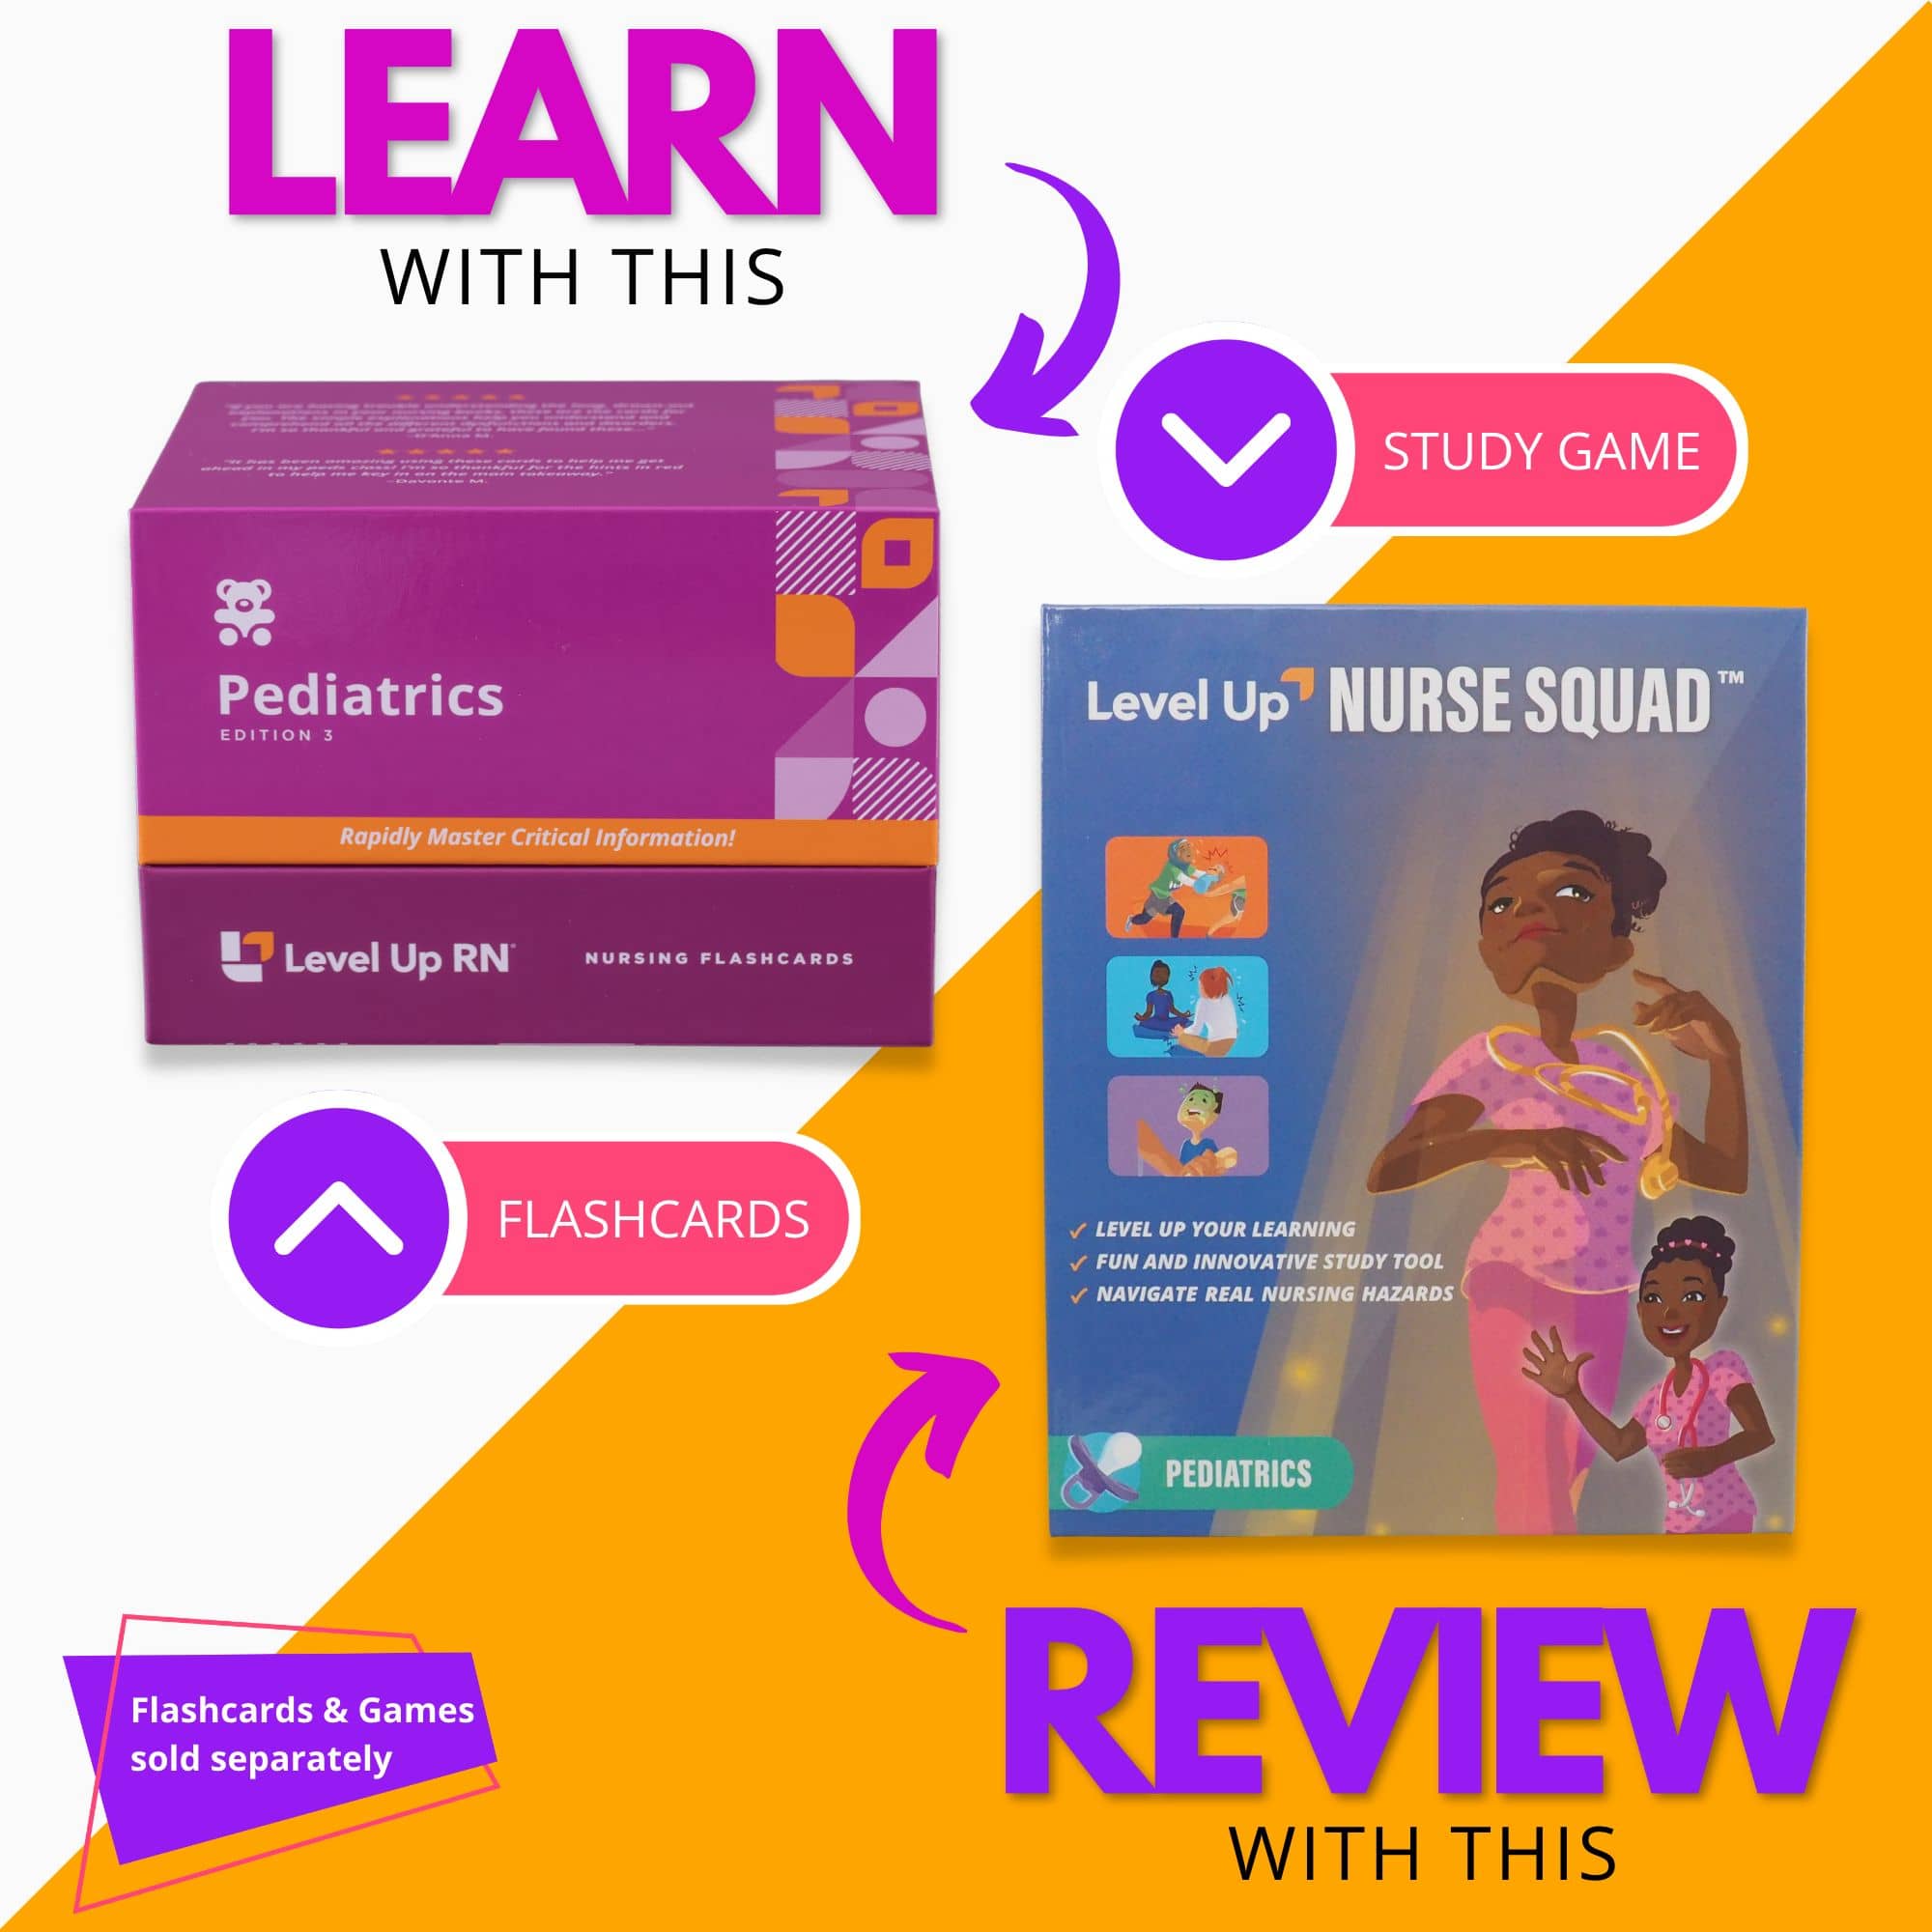 Learn with the flashcards, review with the study game (sold separately)